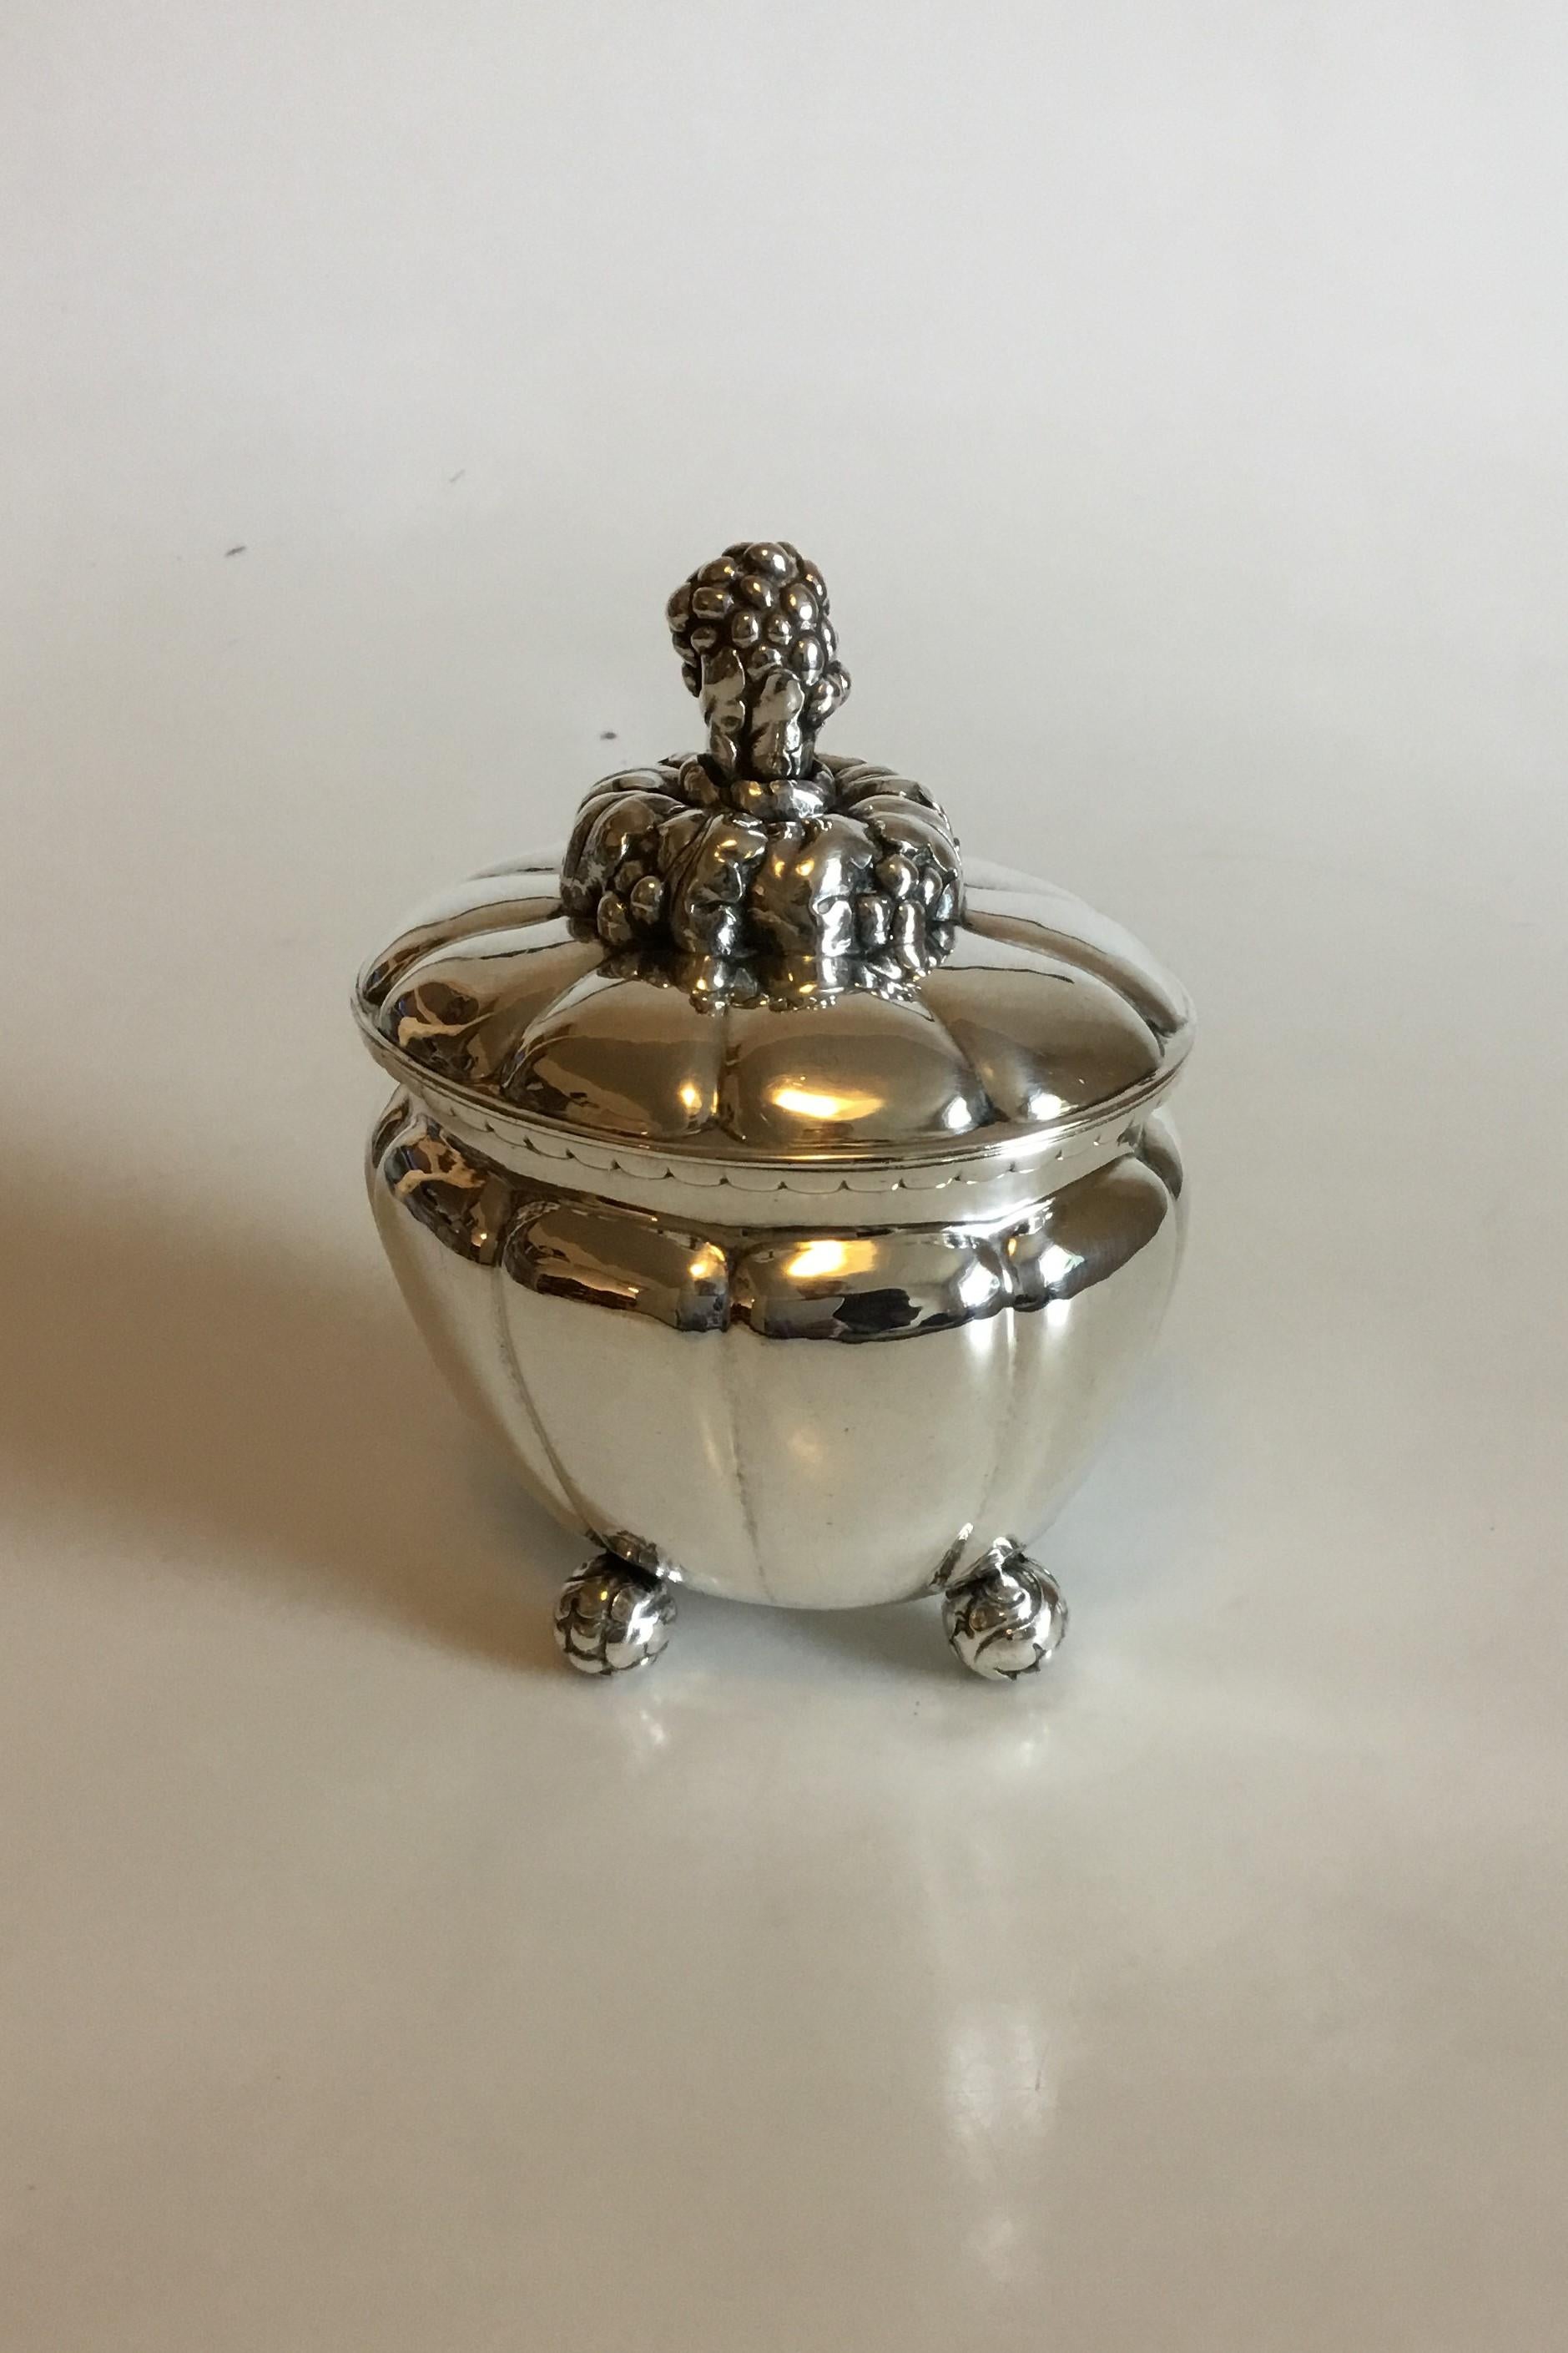 Georg Jensen silver 830 Bonbonniere no 72 with Swedish import marks. From 1918.
Measures cm / 5 29/32 in x 12 cm / 4 23/32 in x 10 cm / 3 15/16 in.
Weighs 491 g/ 17.30 oz.